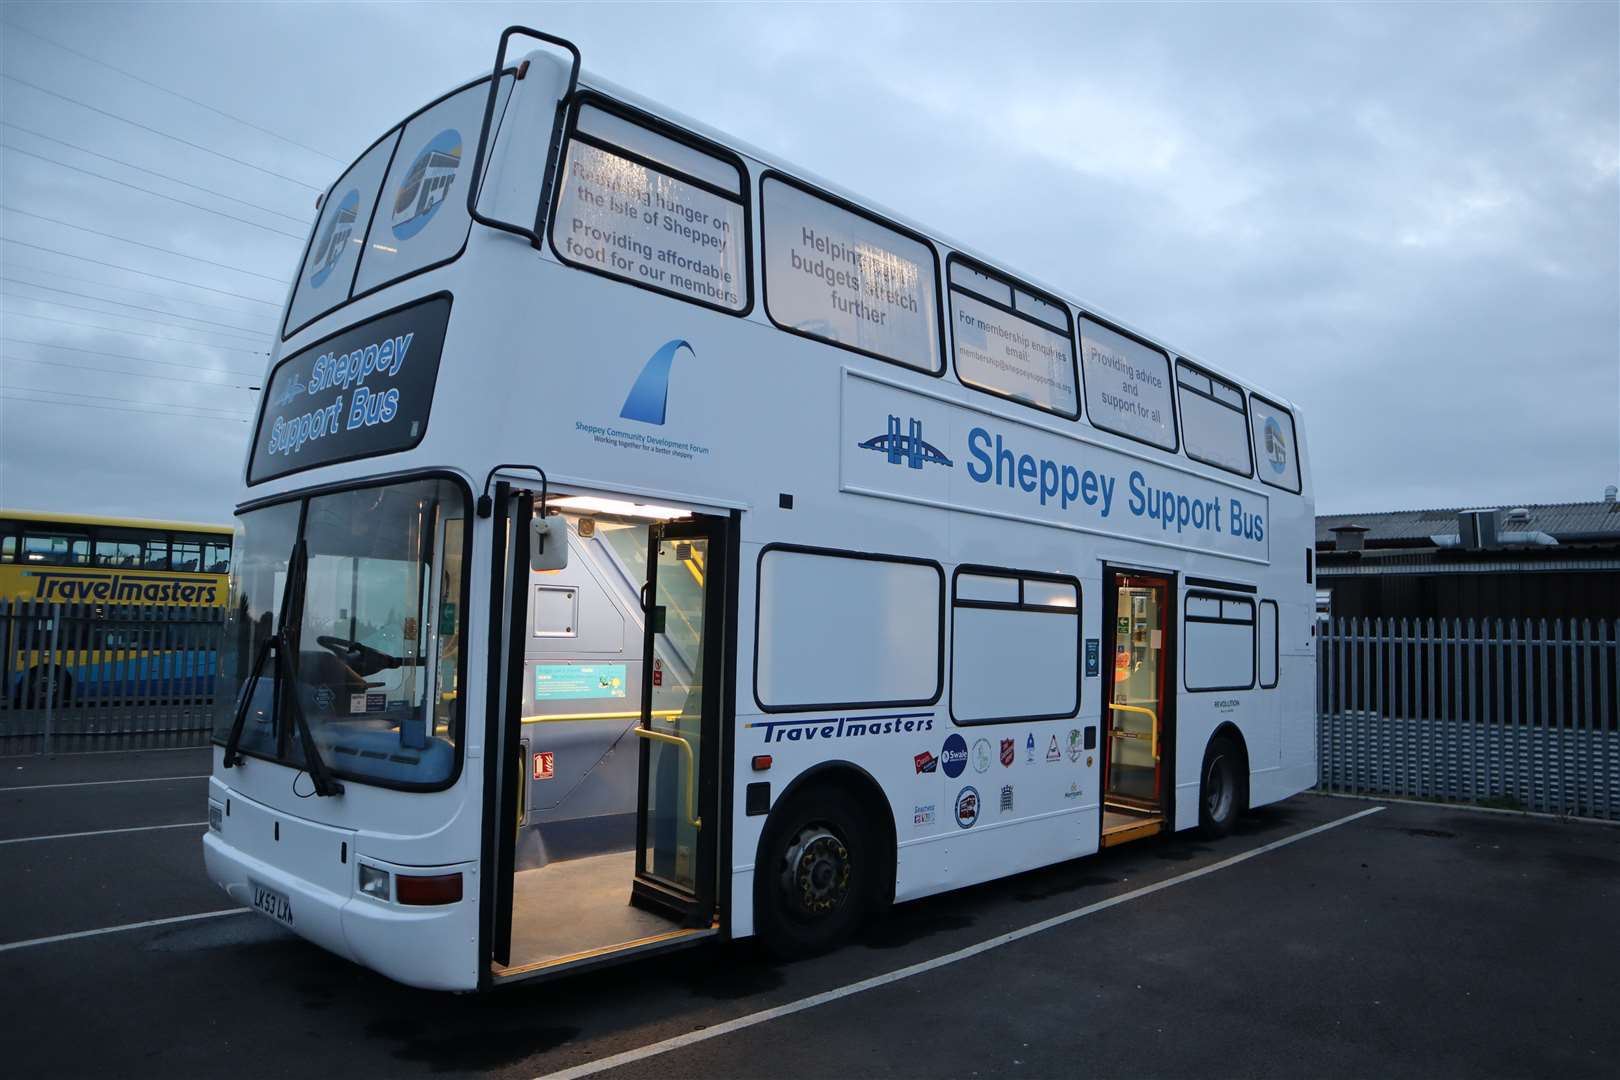 The Sheppey Support Bus